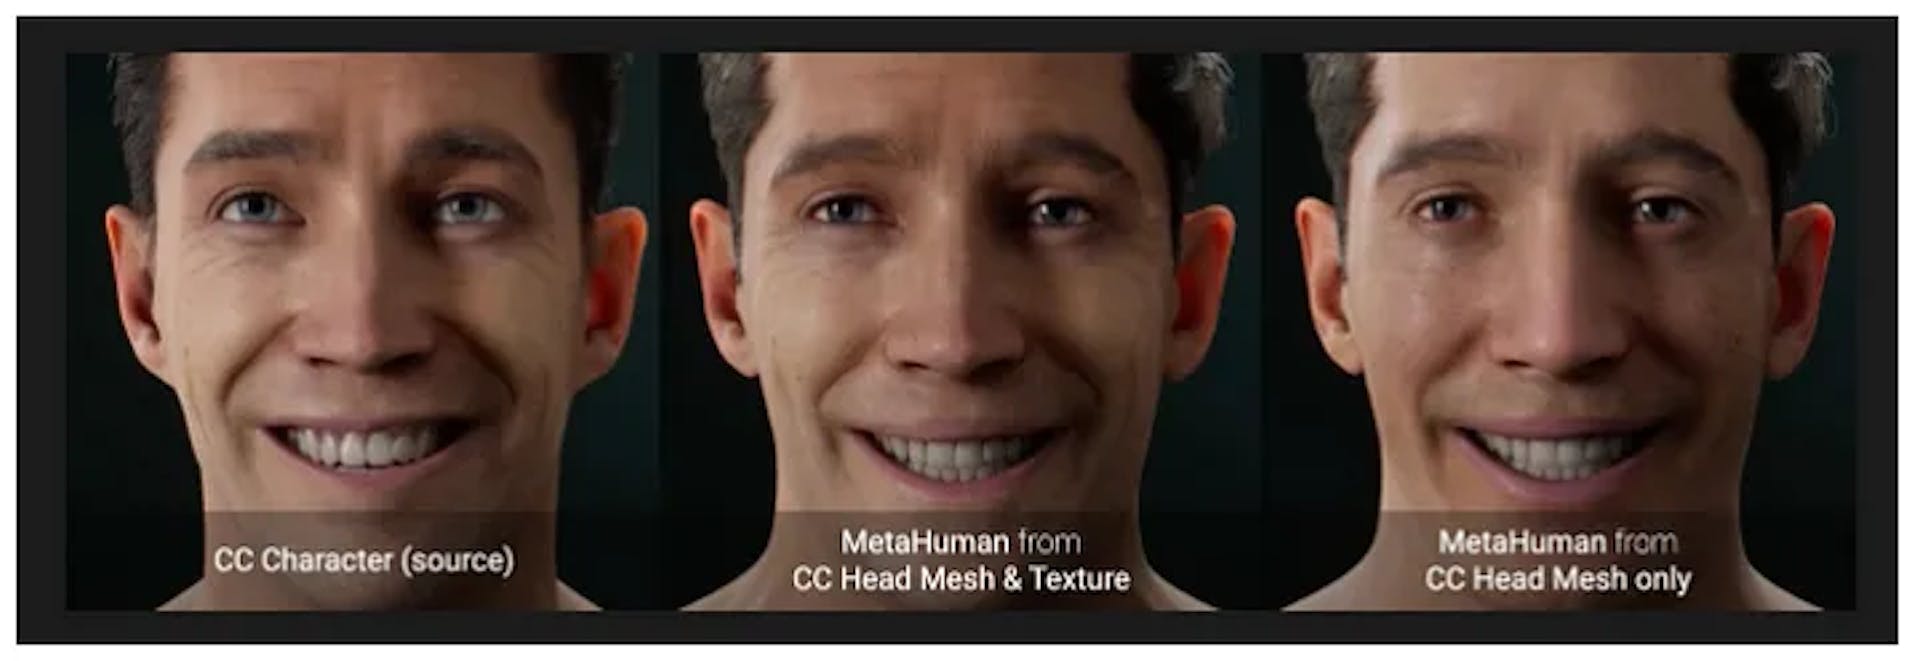 MetaHuman engine developed by Unreal to create 3D avatars